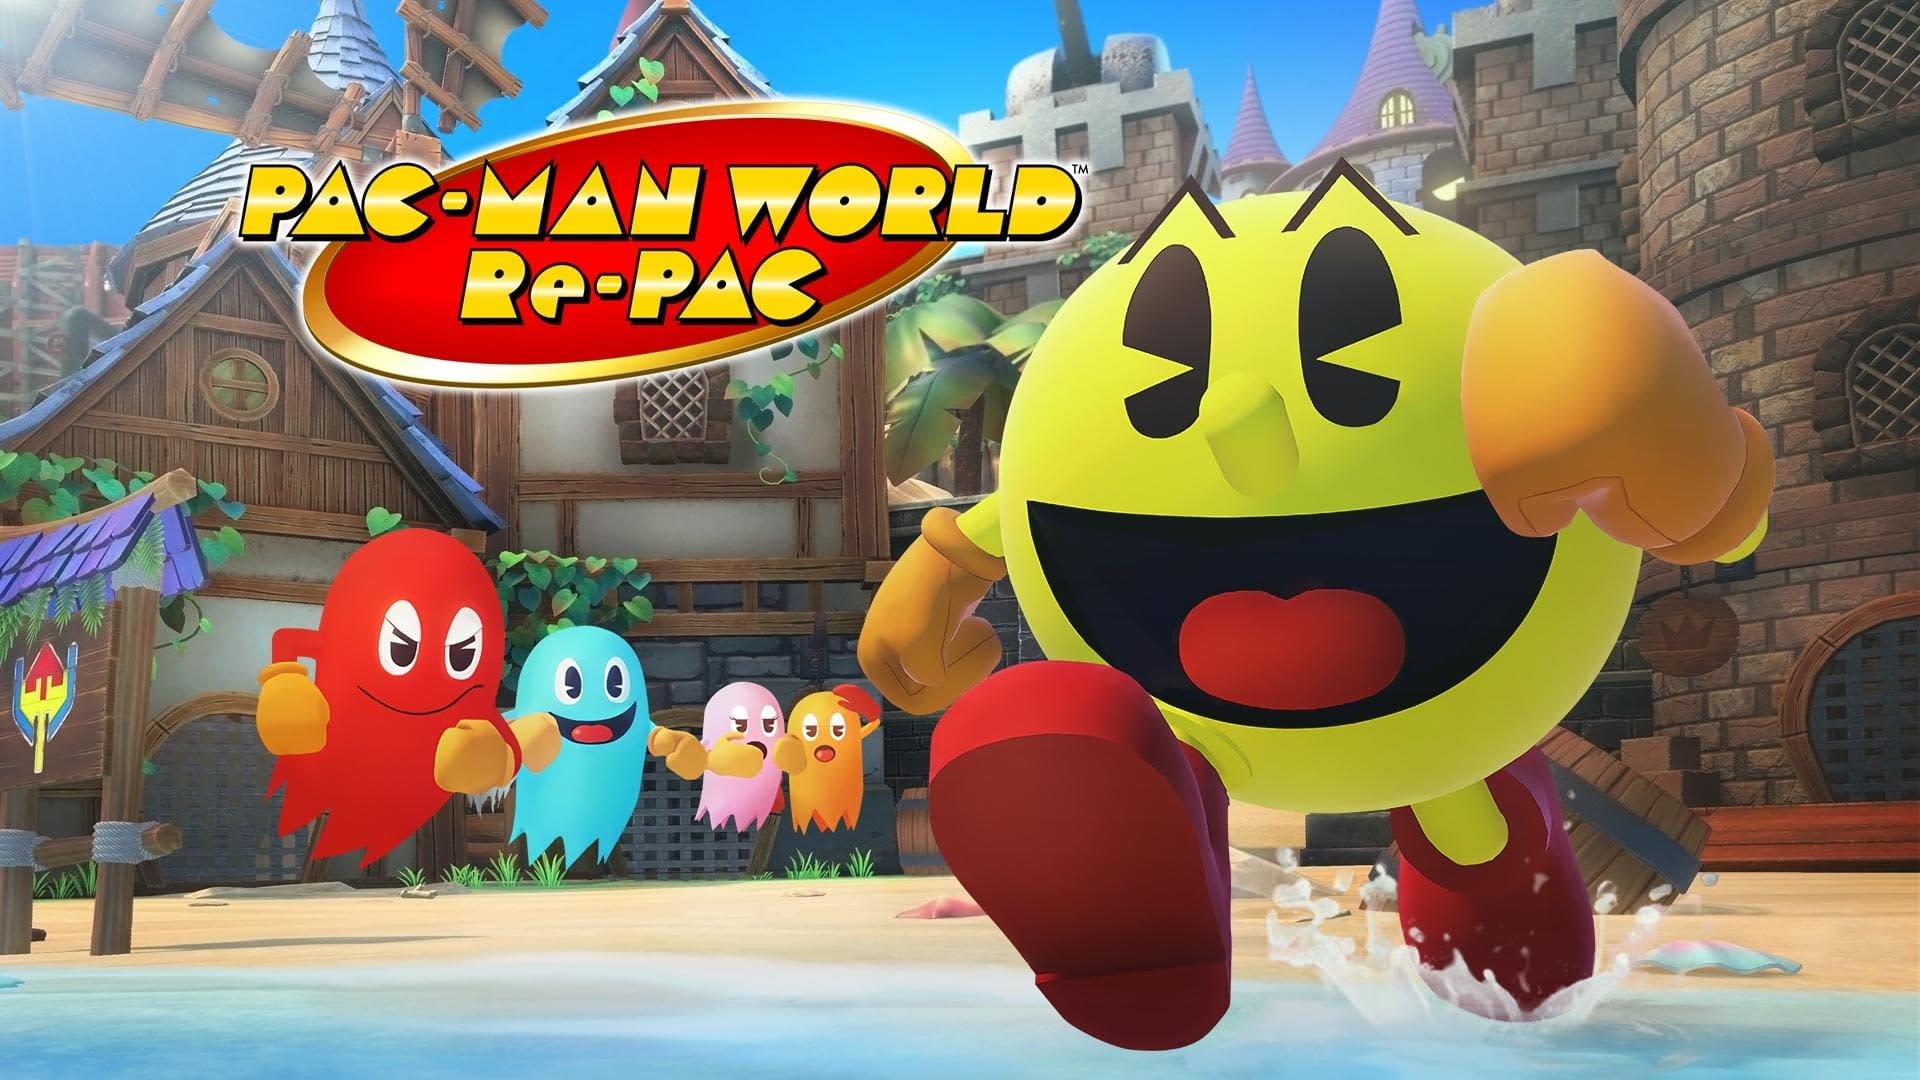 Review: 'Pac-Man' battle royale breathes new life, Millennial